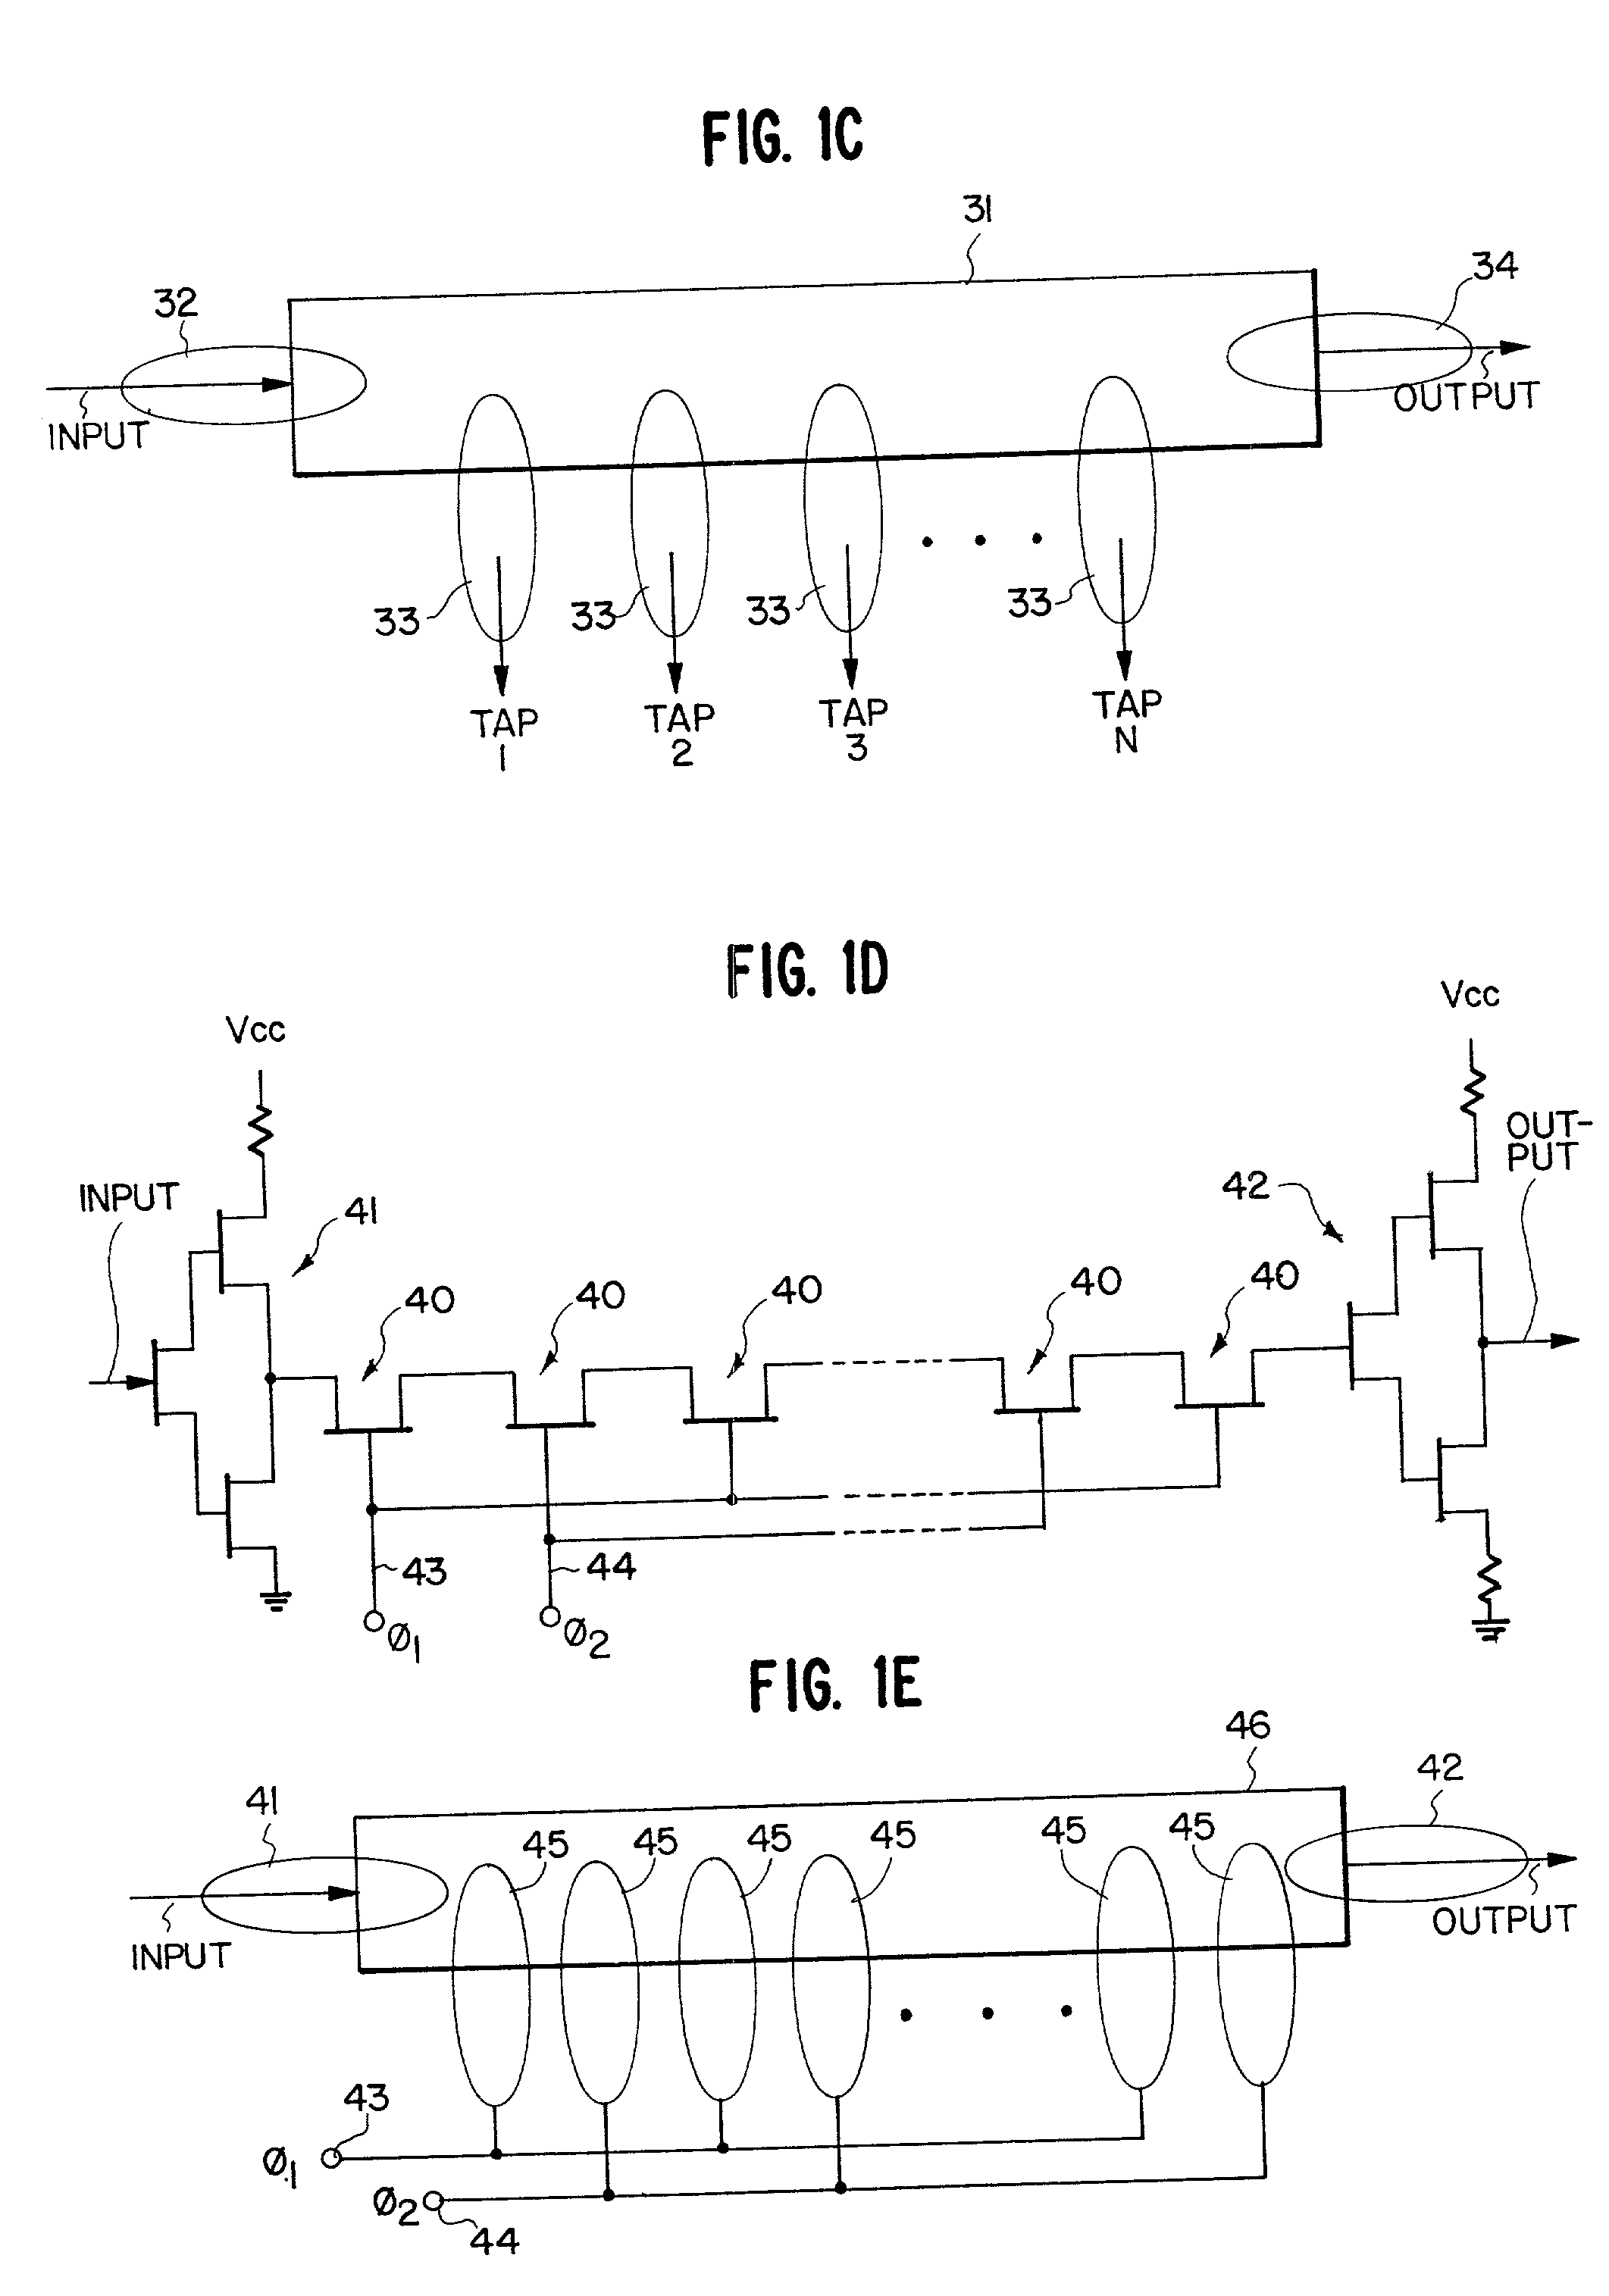 Memory device having a systematic arrangement of logical data locations and having plural data portals